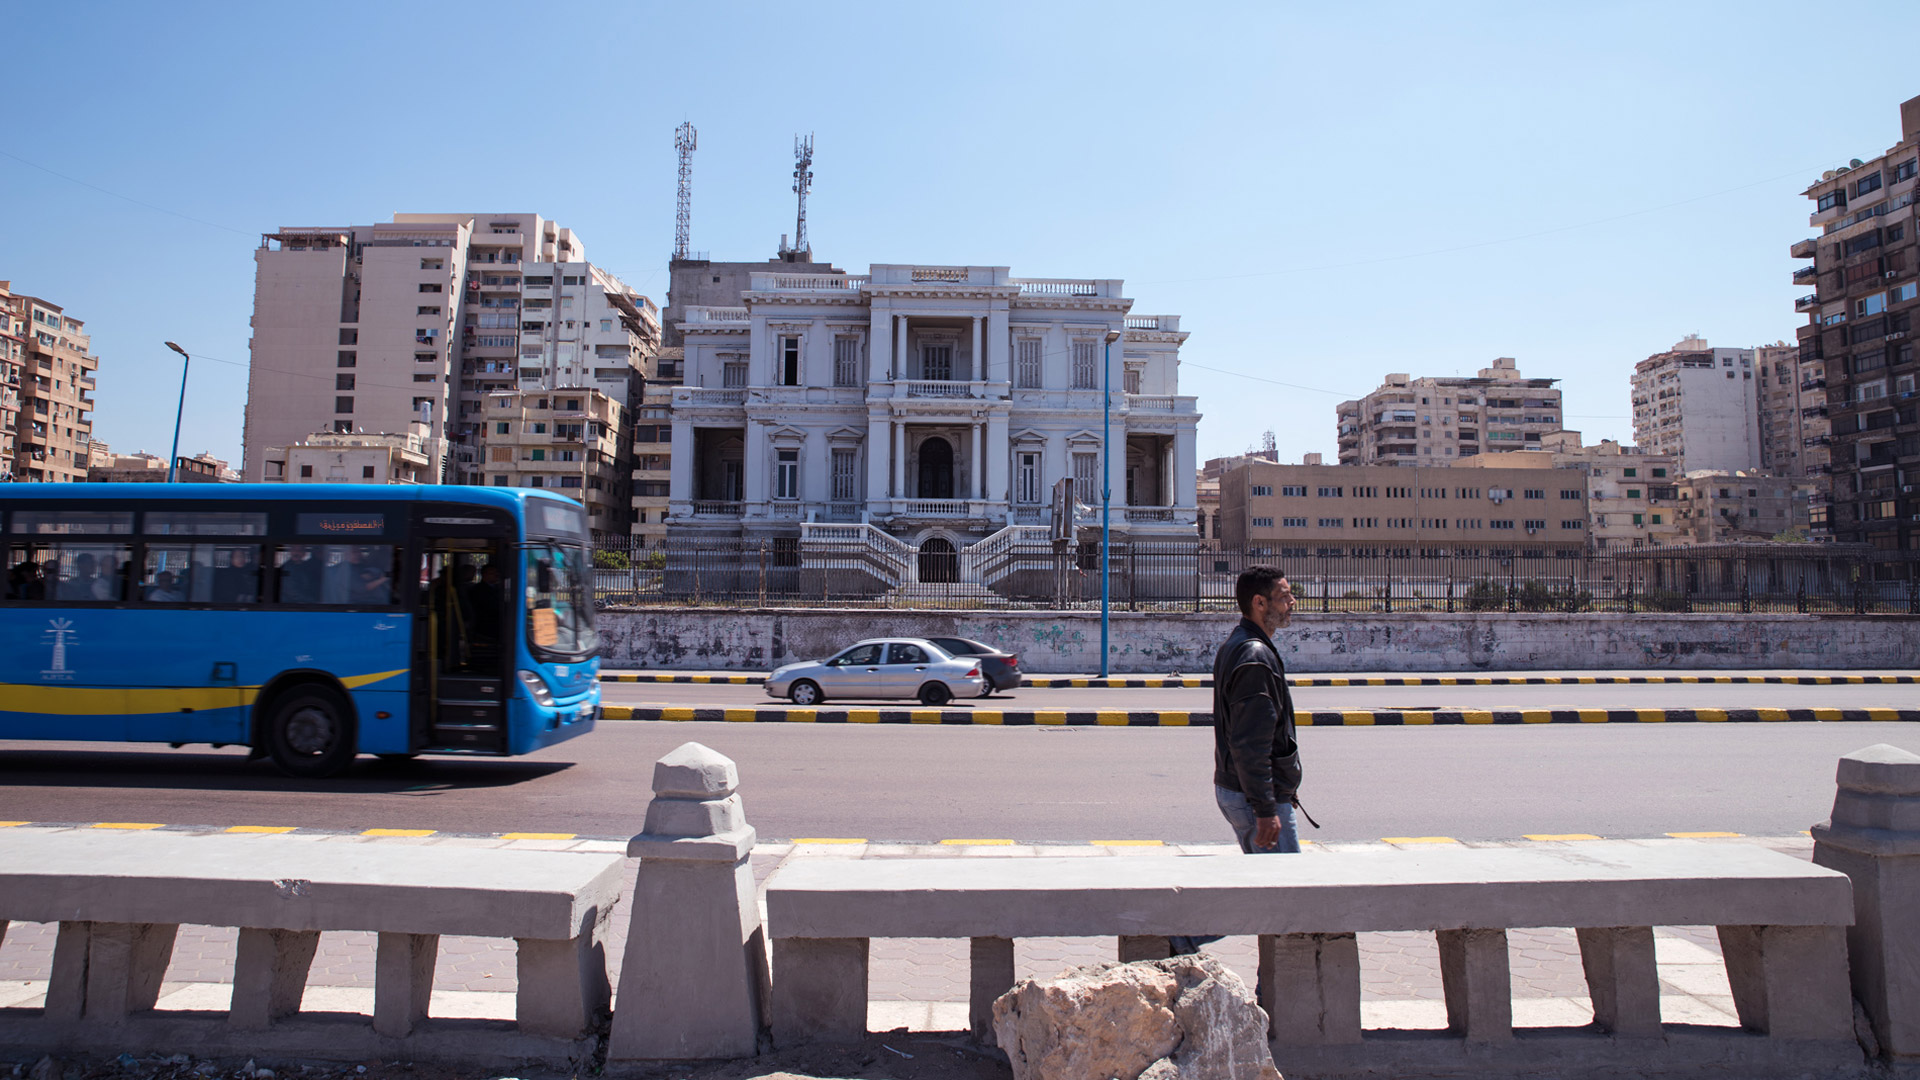 Much of Alexandria's architectural heritage has been destroyed, blamed on corruption and shadowy business deals.